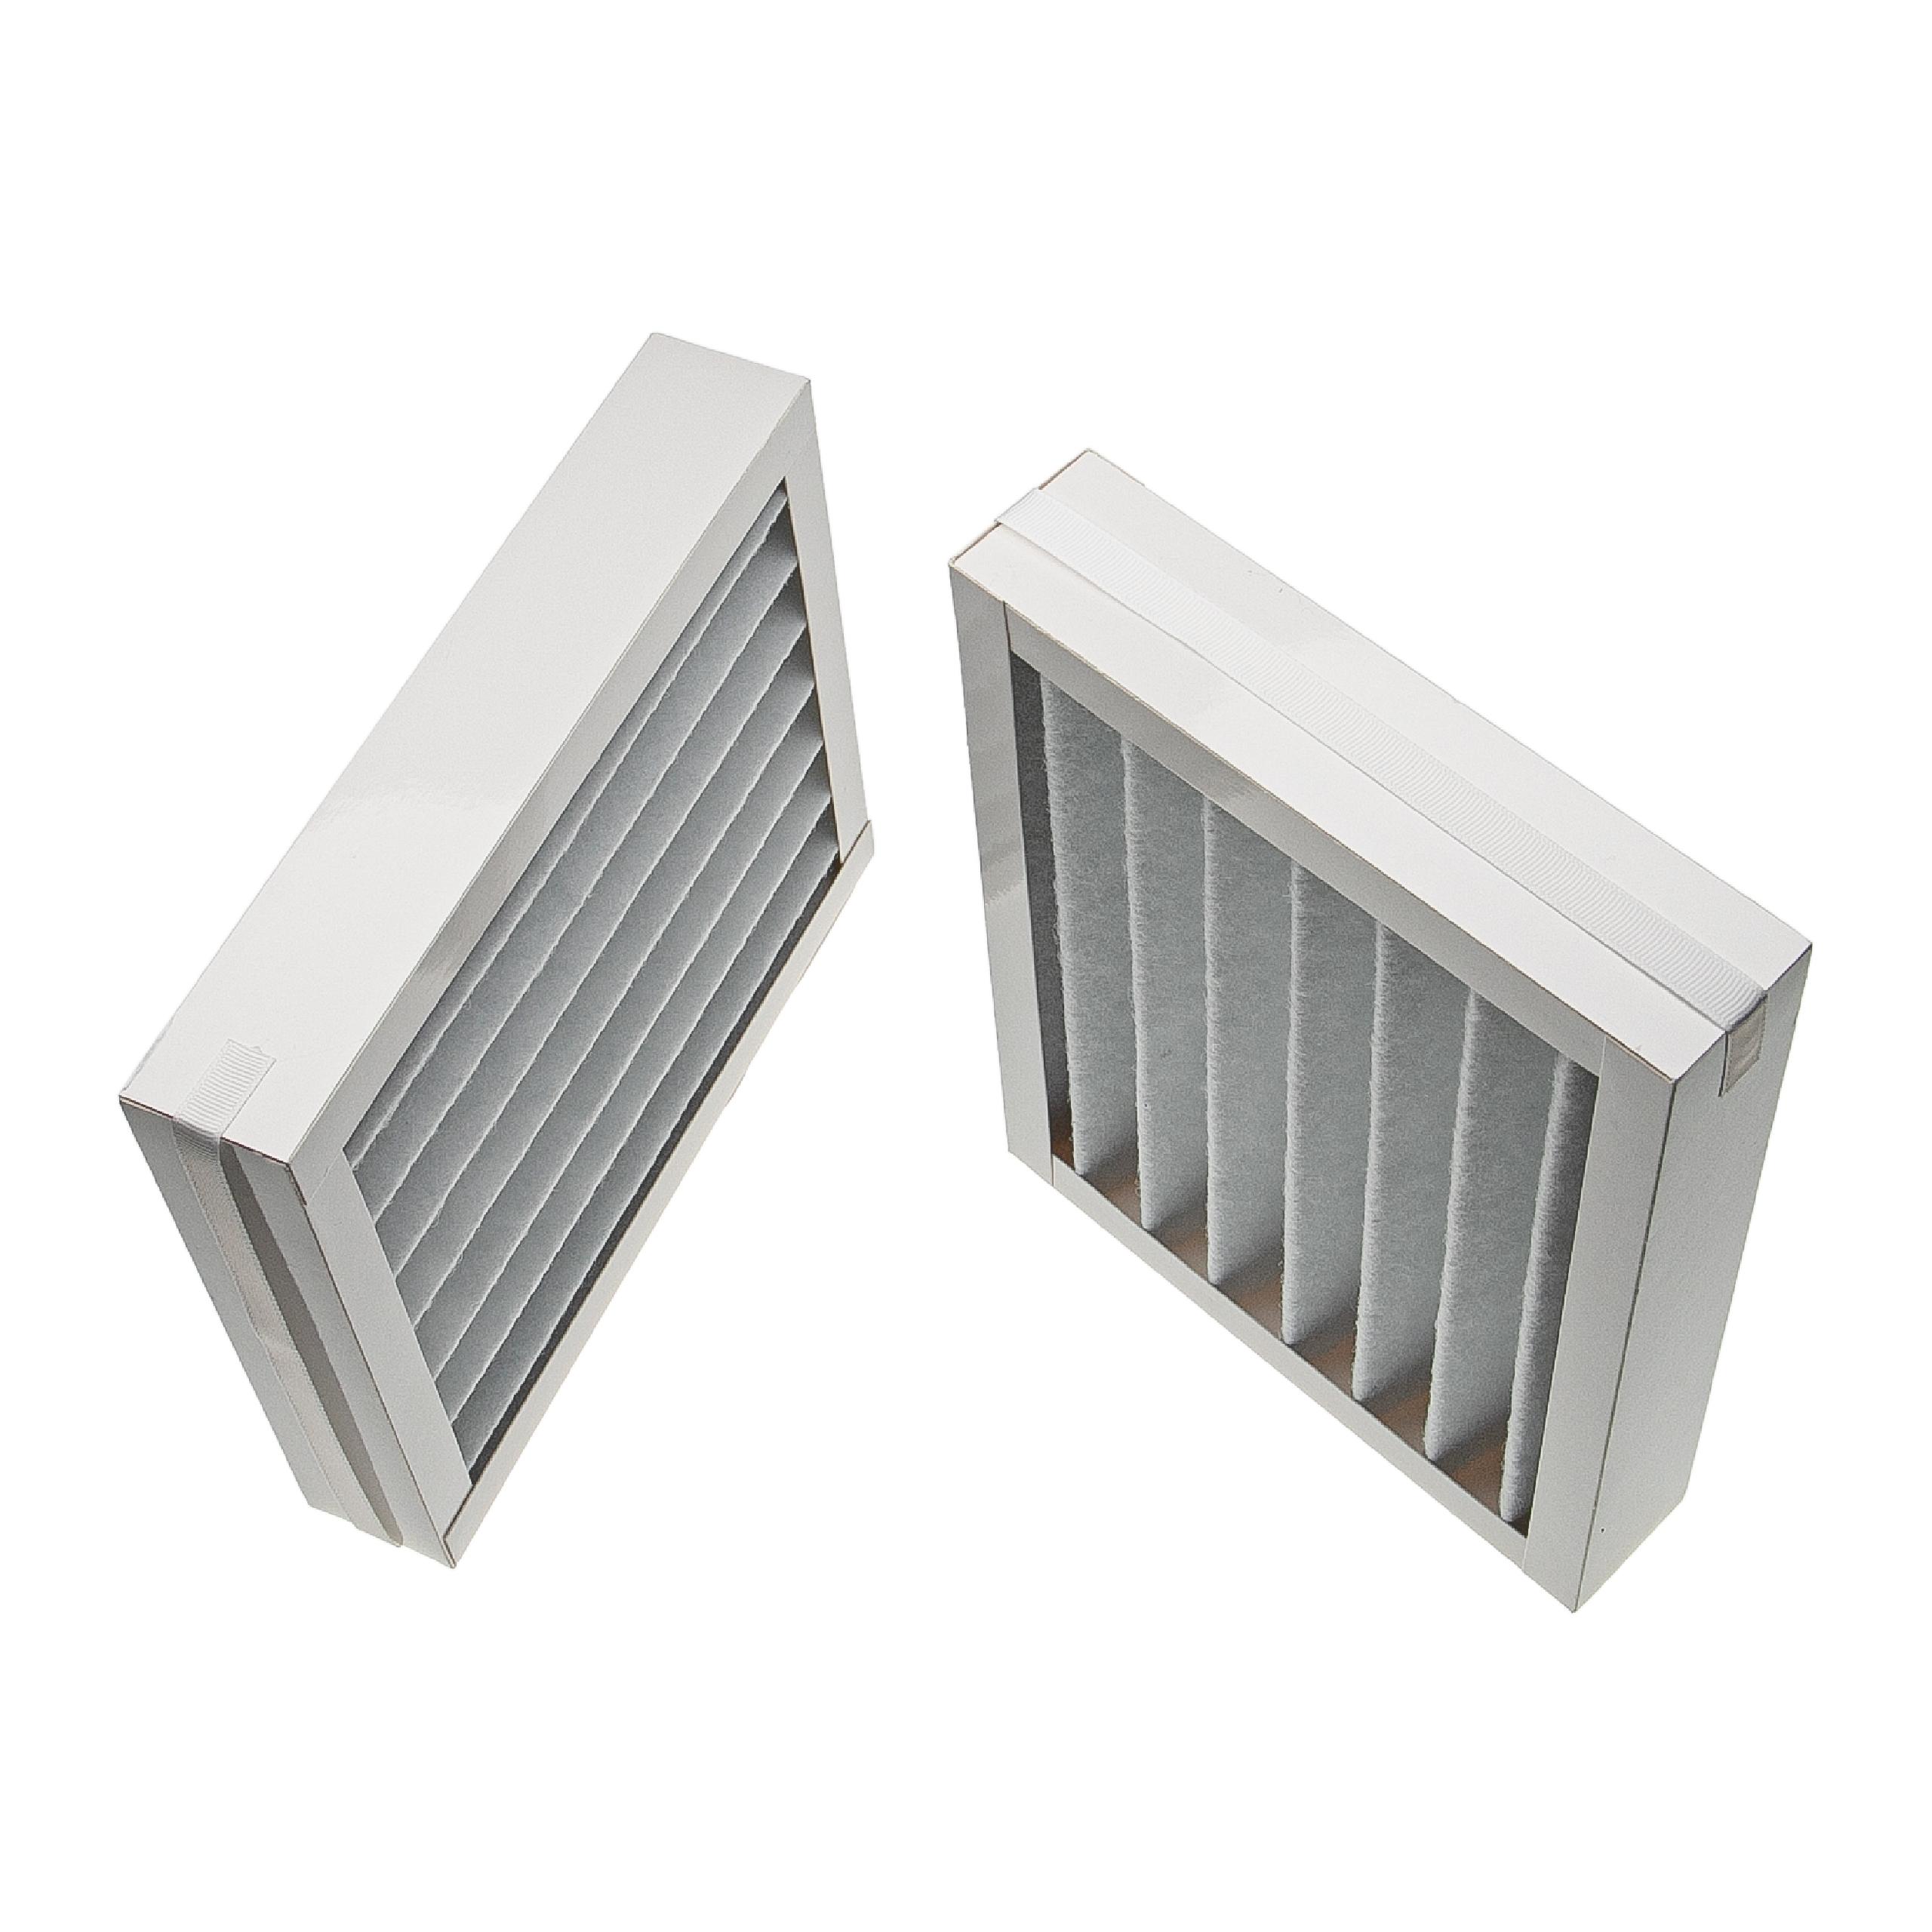 2x Filter G4 replaces Paul 524000040 for Paul Air Ventilation Device - Coarse Dust Filters